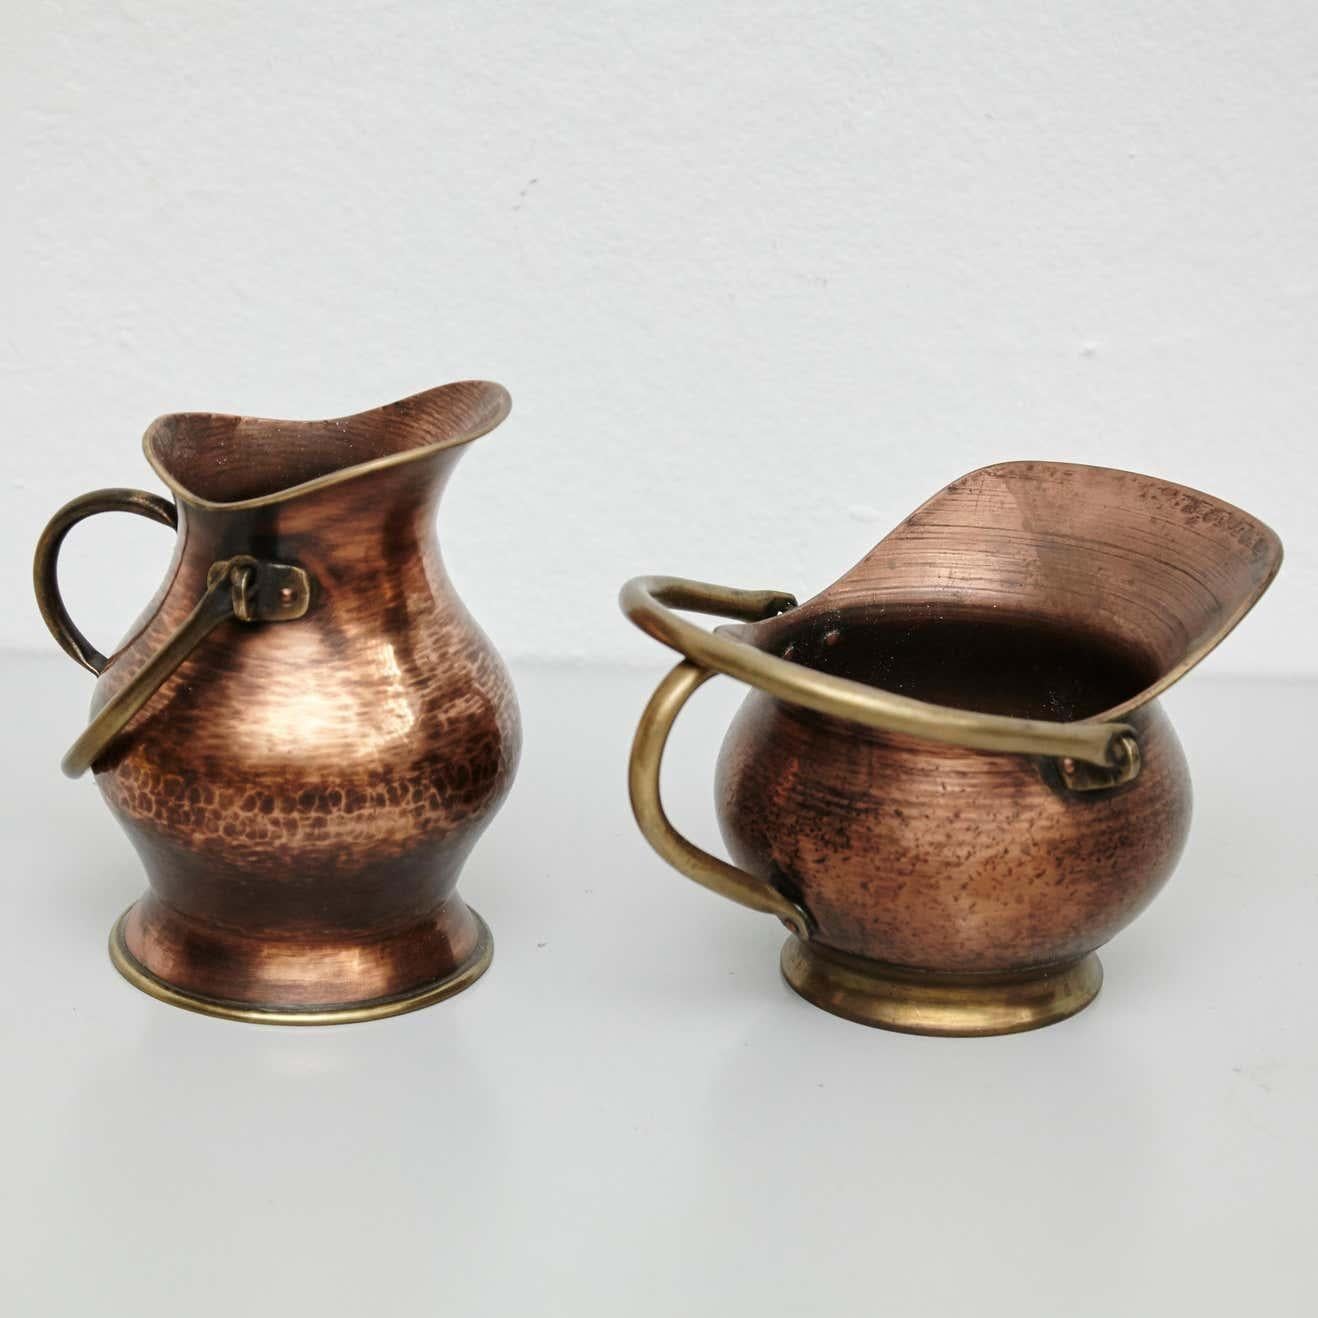 Set of two vintage brass coal scuttle bucket
By unknown manufacturer, France, circa 1950.

In original condition, with minor wear consistent with age and use, preserving a beautiful patina.

Materials:
Brass

Dimensions:
Bucket 1: D 17 cm x